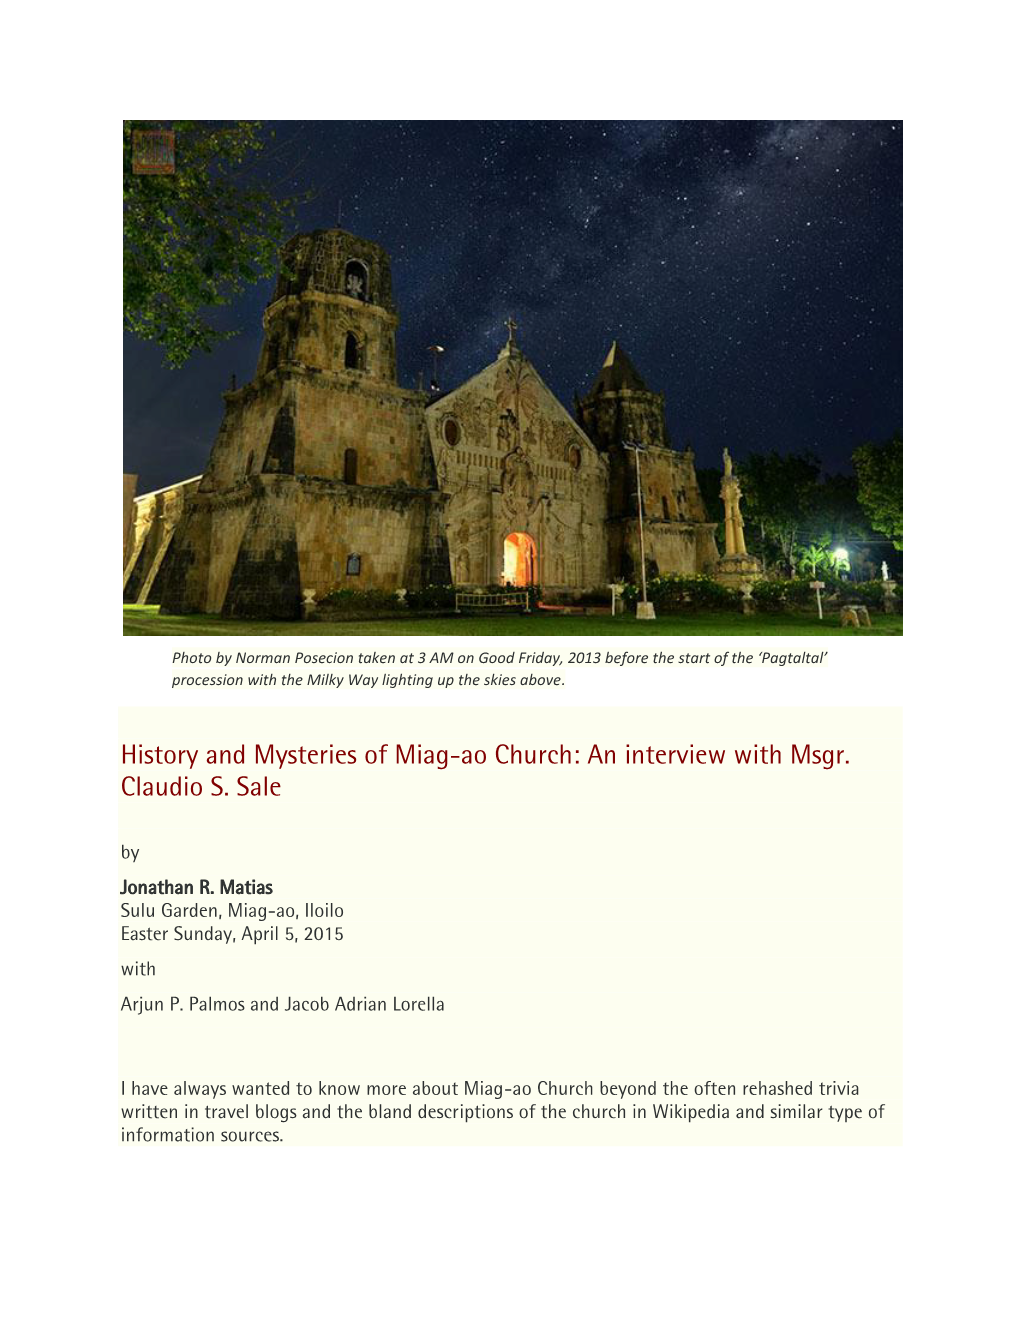 History and Mysteries of Miag-Ao Church: an Interview with Msgr